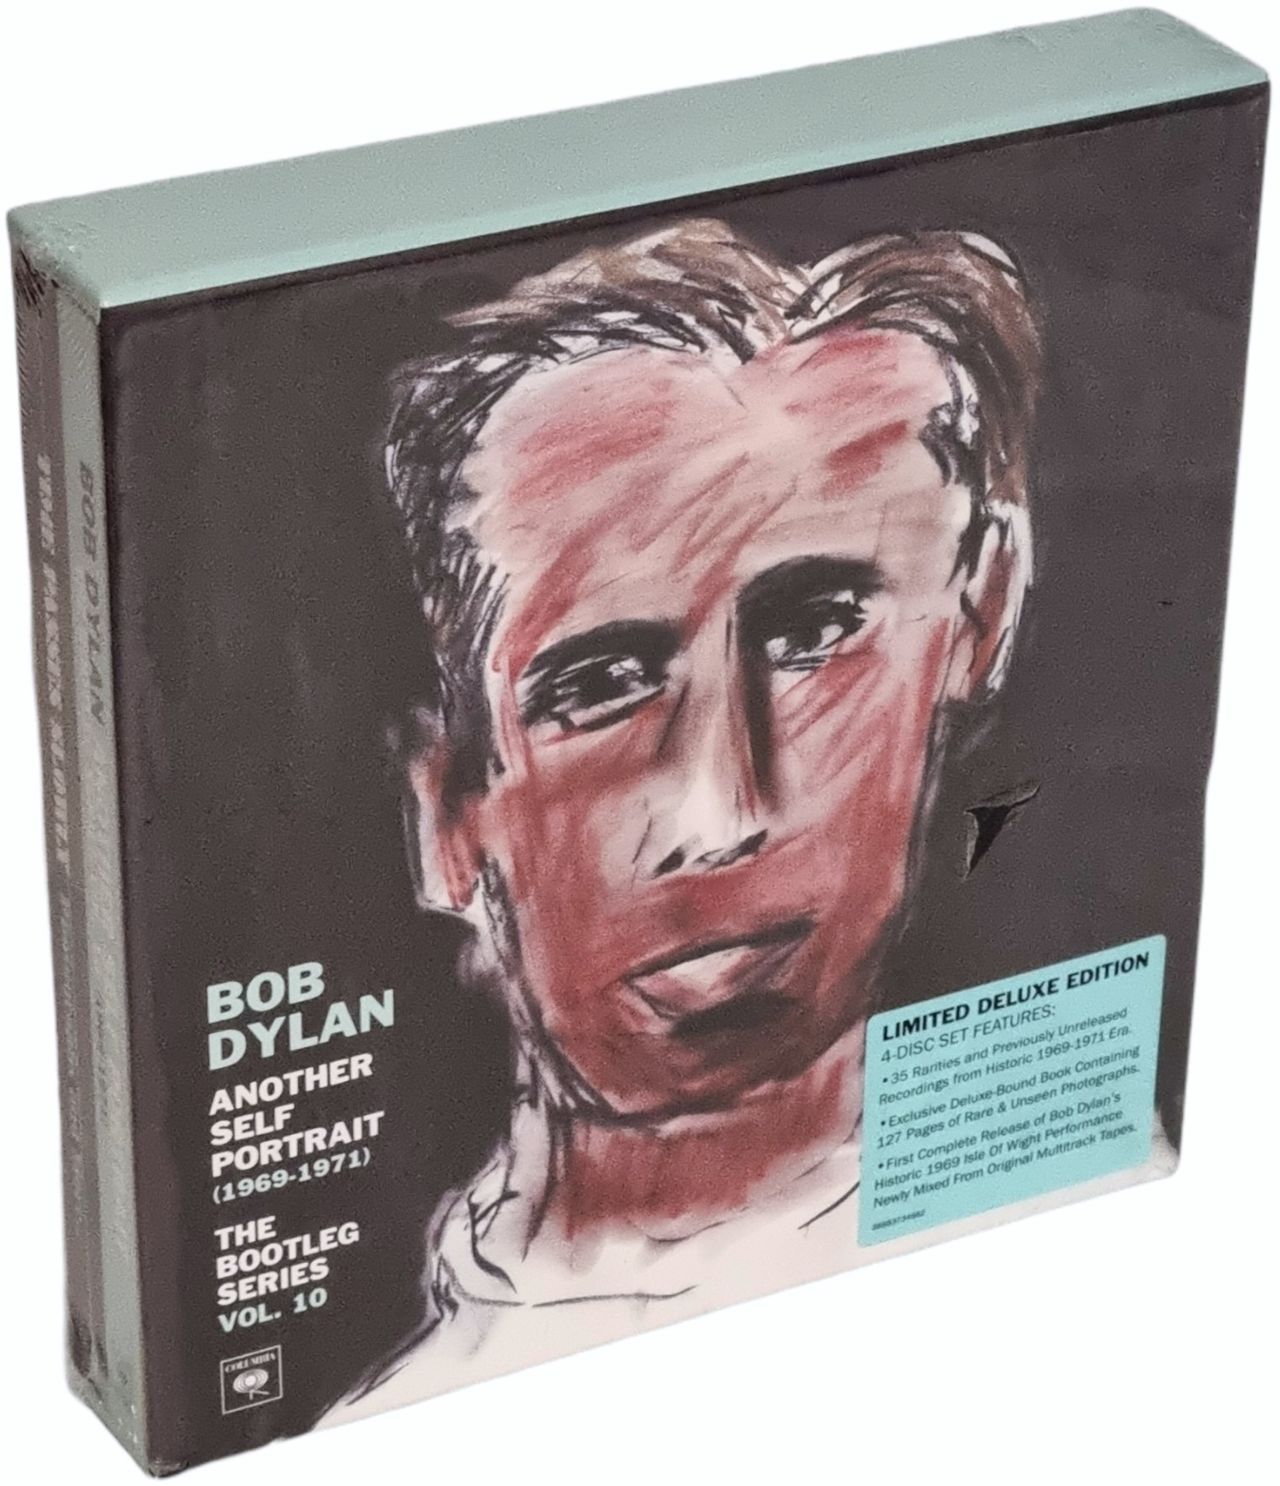 Bob Dylan Another Self Portrait (1969-1971): The Bootleg Series